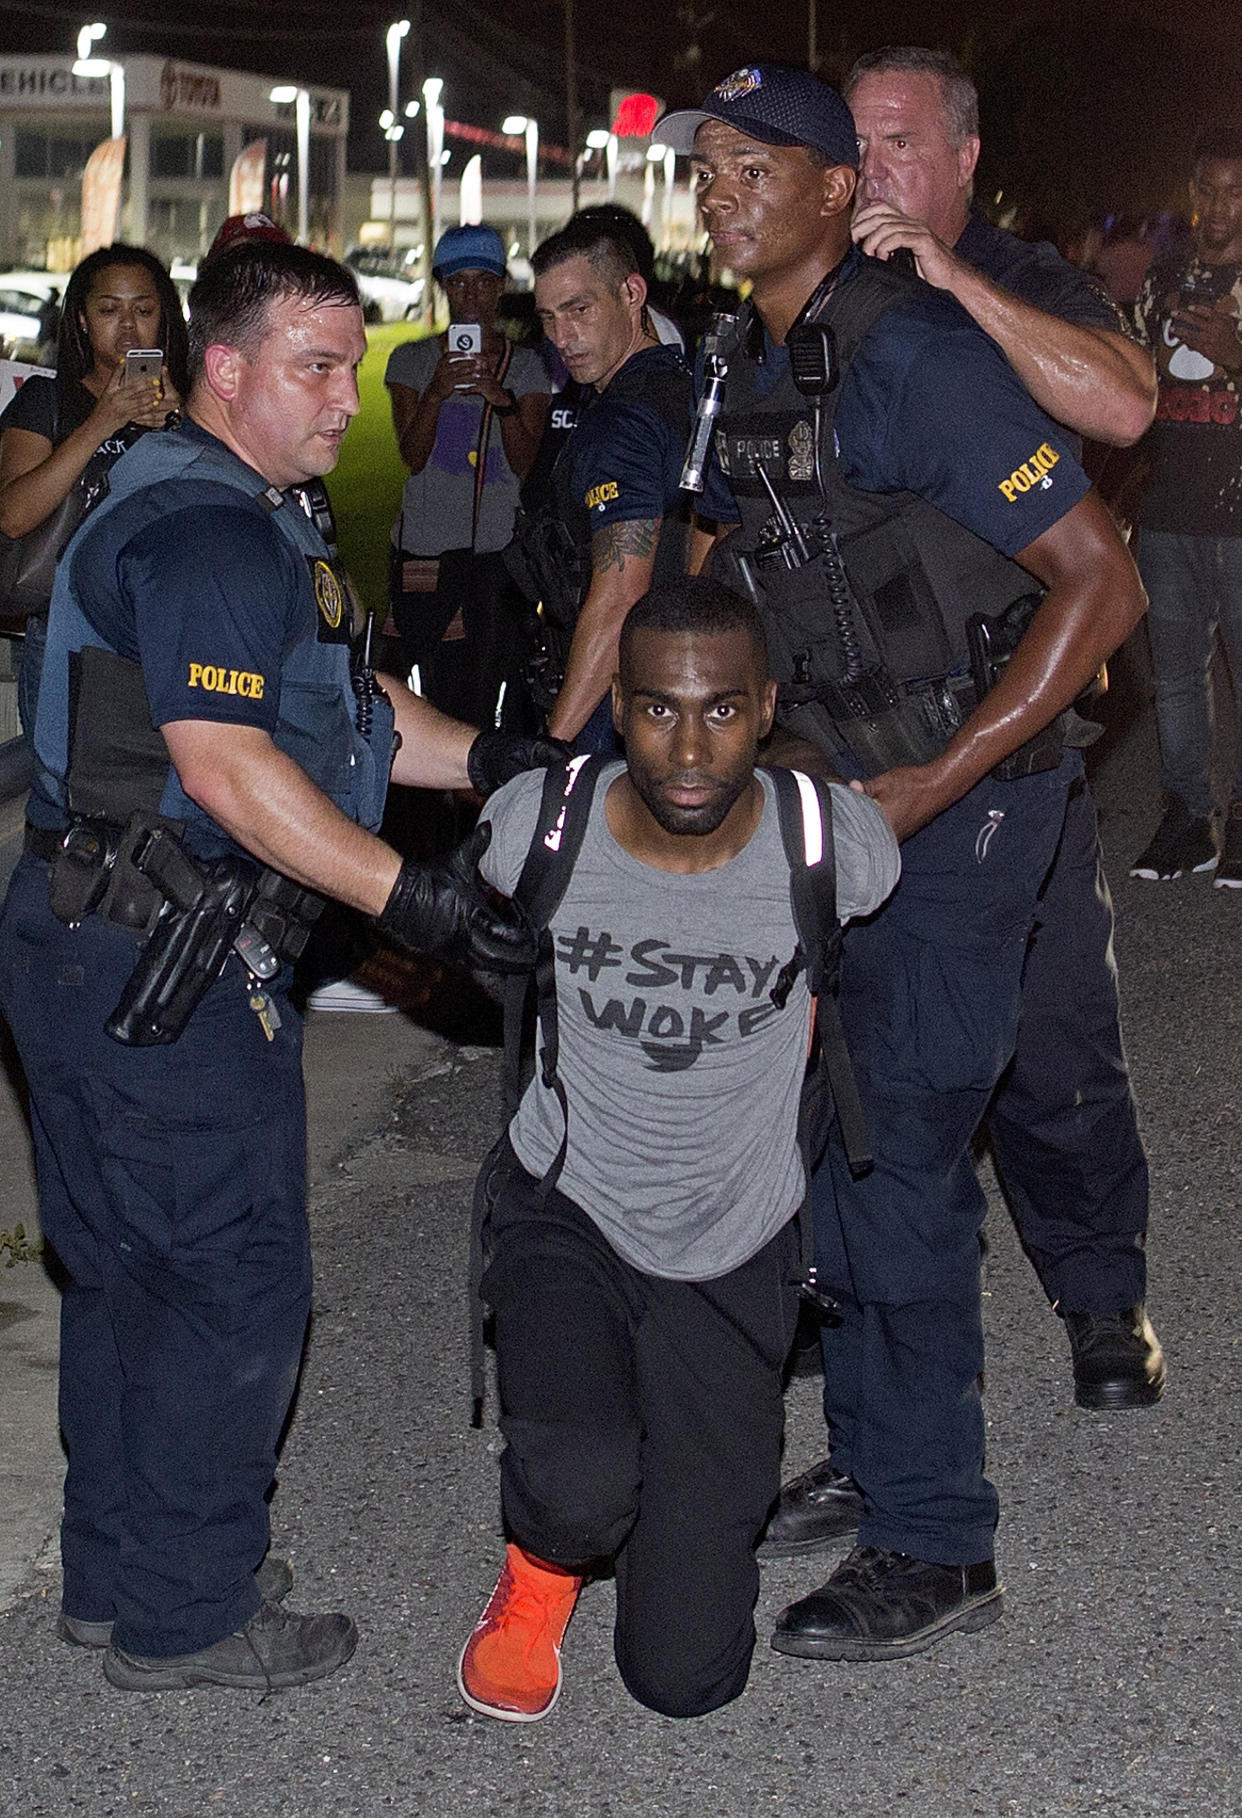 Police officers arrest activist DeRay McKesson during a protest along Airline Highway, a major road that passes in front of the Baton Rouge Police Department headquarters Saturday, July 9, 2016, in Baton Rouge, La. Protesters angry over the fatal shooting of Alton Sterling by two white Baton Rouge police officers rallied Saturday at the convenience store where he was shot, in front of the city's police department and at the state Capitol for another day of demonstrations. (AP Photo/Max Becherer)